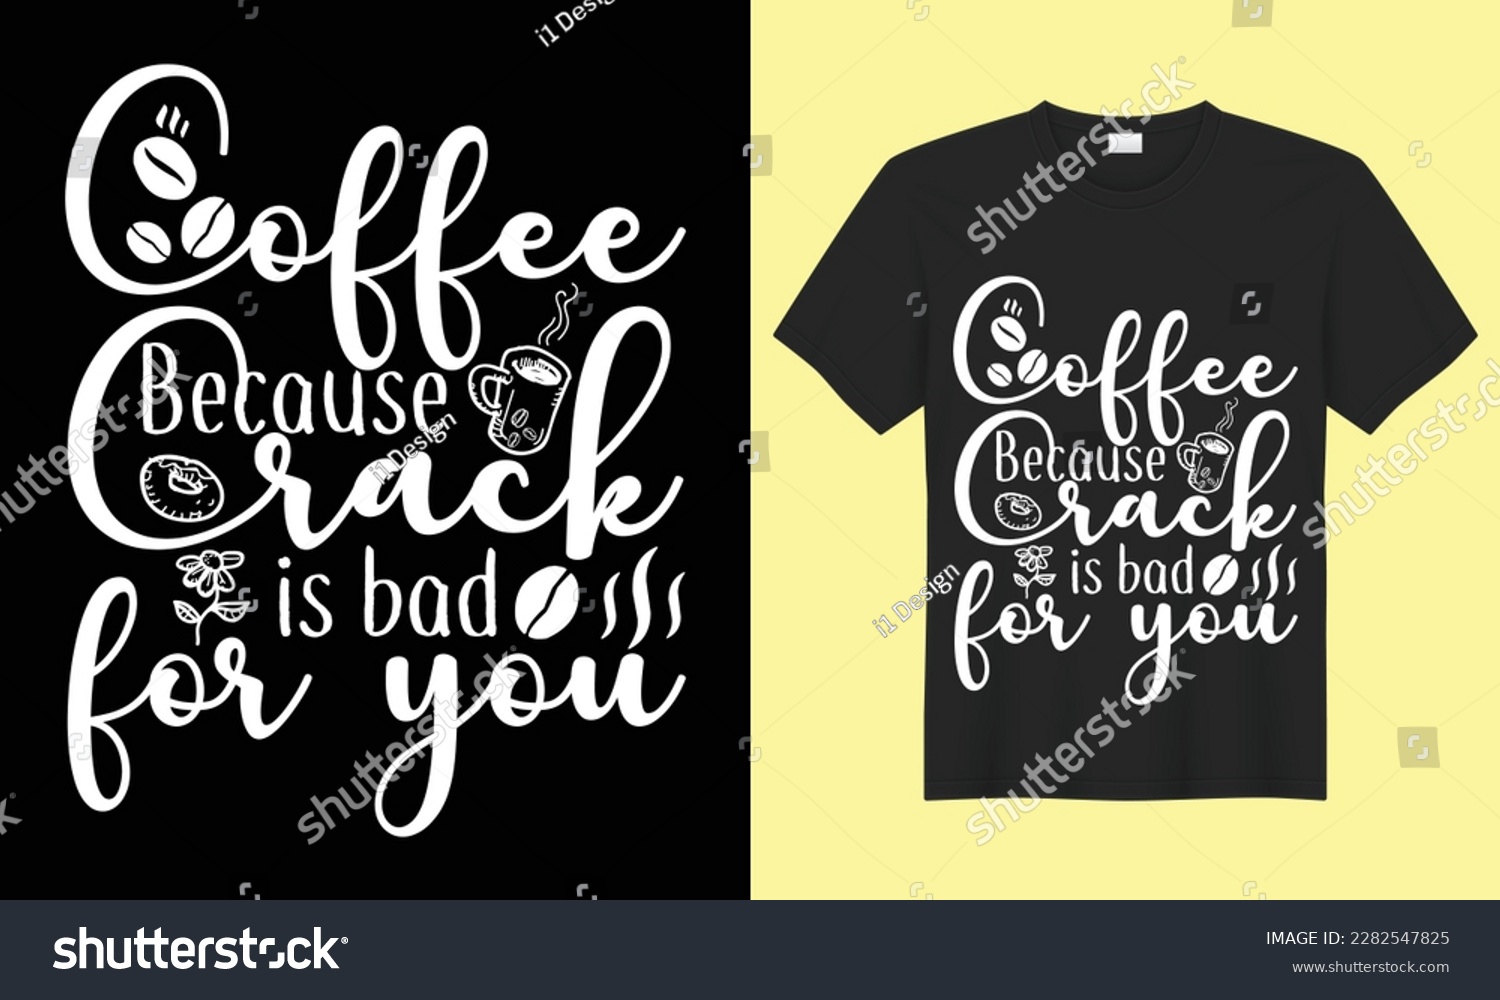 SVG of Coffee because crack is bad for you SVG Typography T-shirt Design Vector Template. Hand  Lettering Illustration And Printing for T-shirt, Banner, Poster, Flyers, Etc. svg